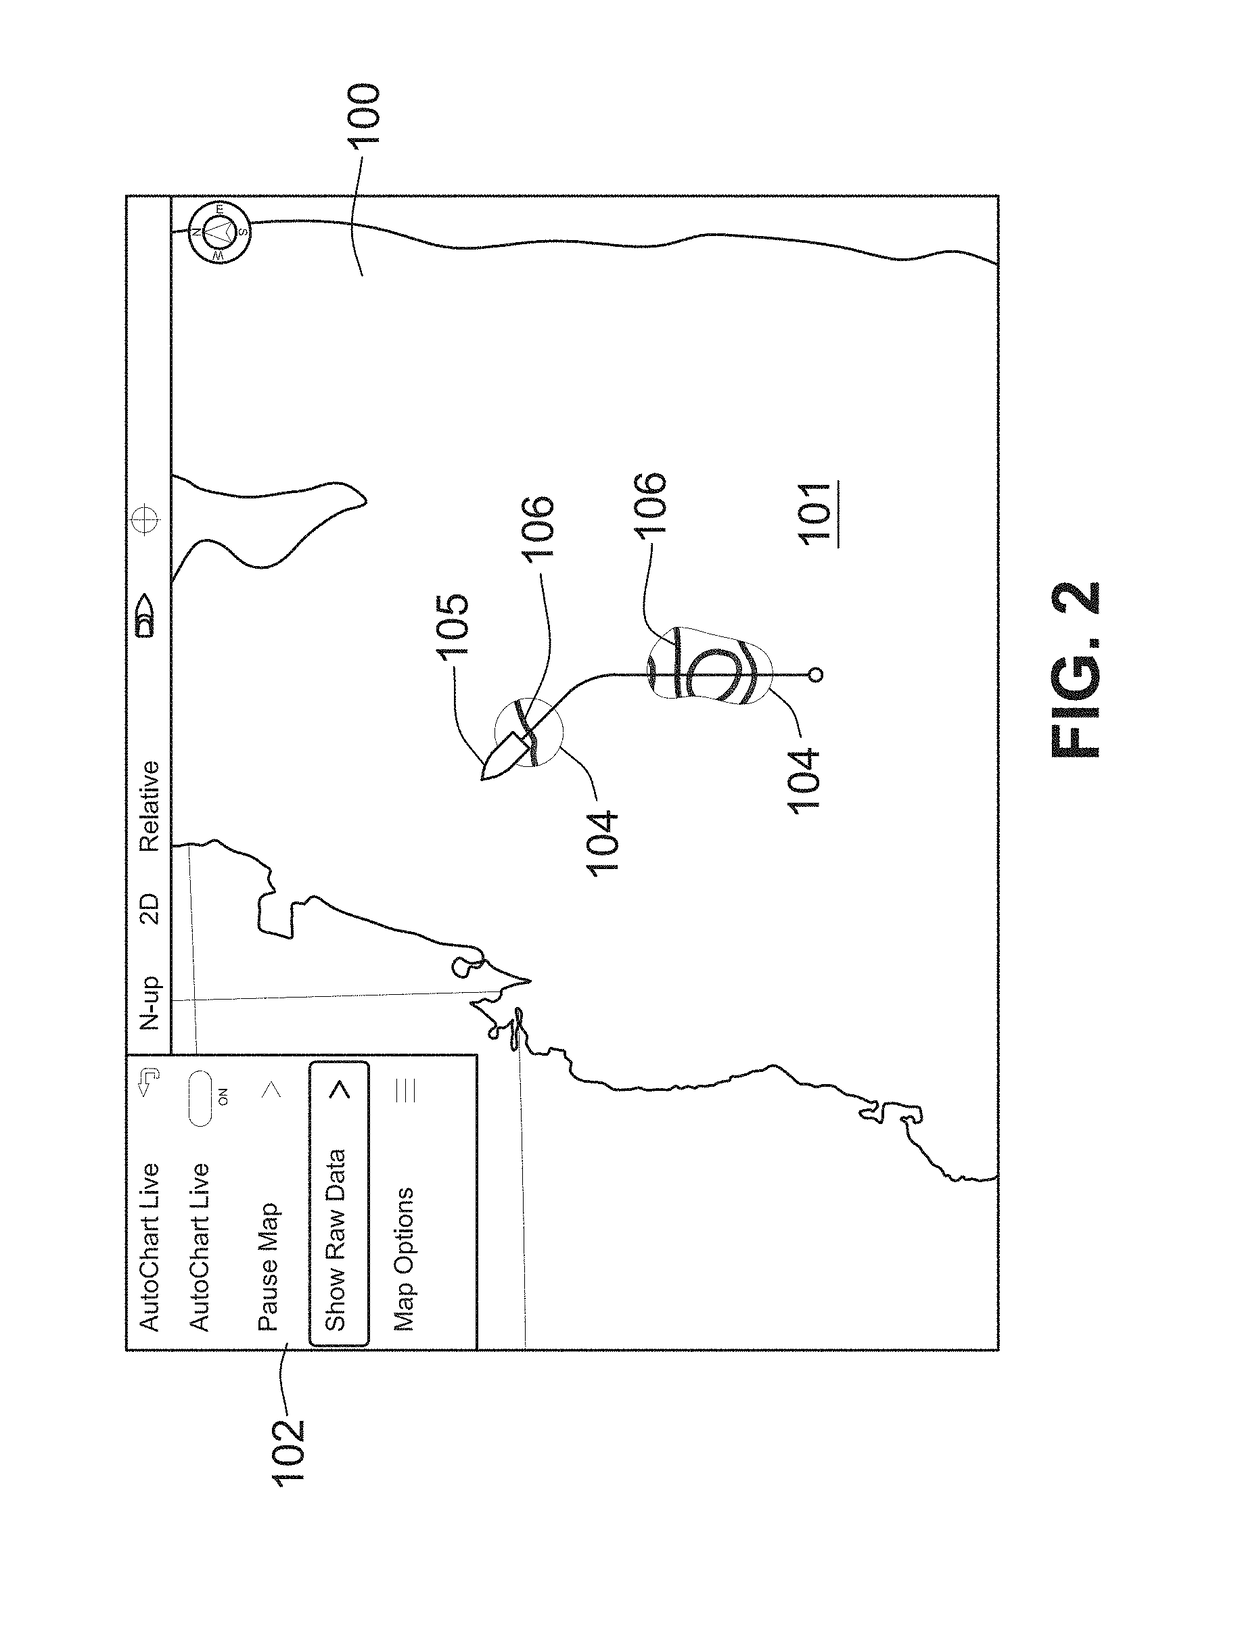 System and method for automatically navigating a charted contour